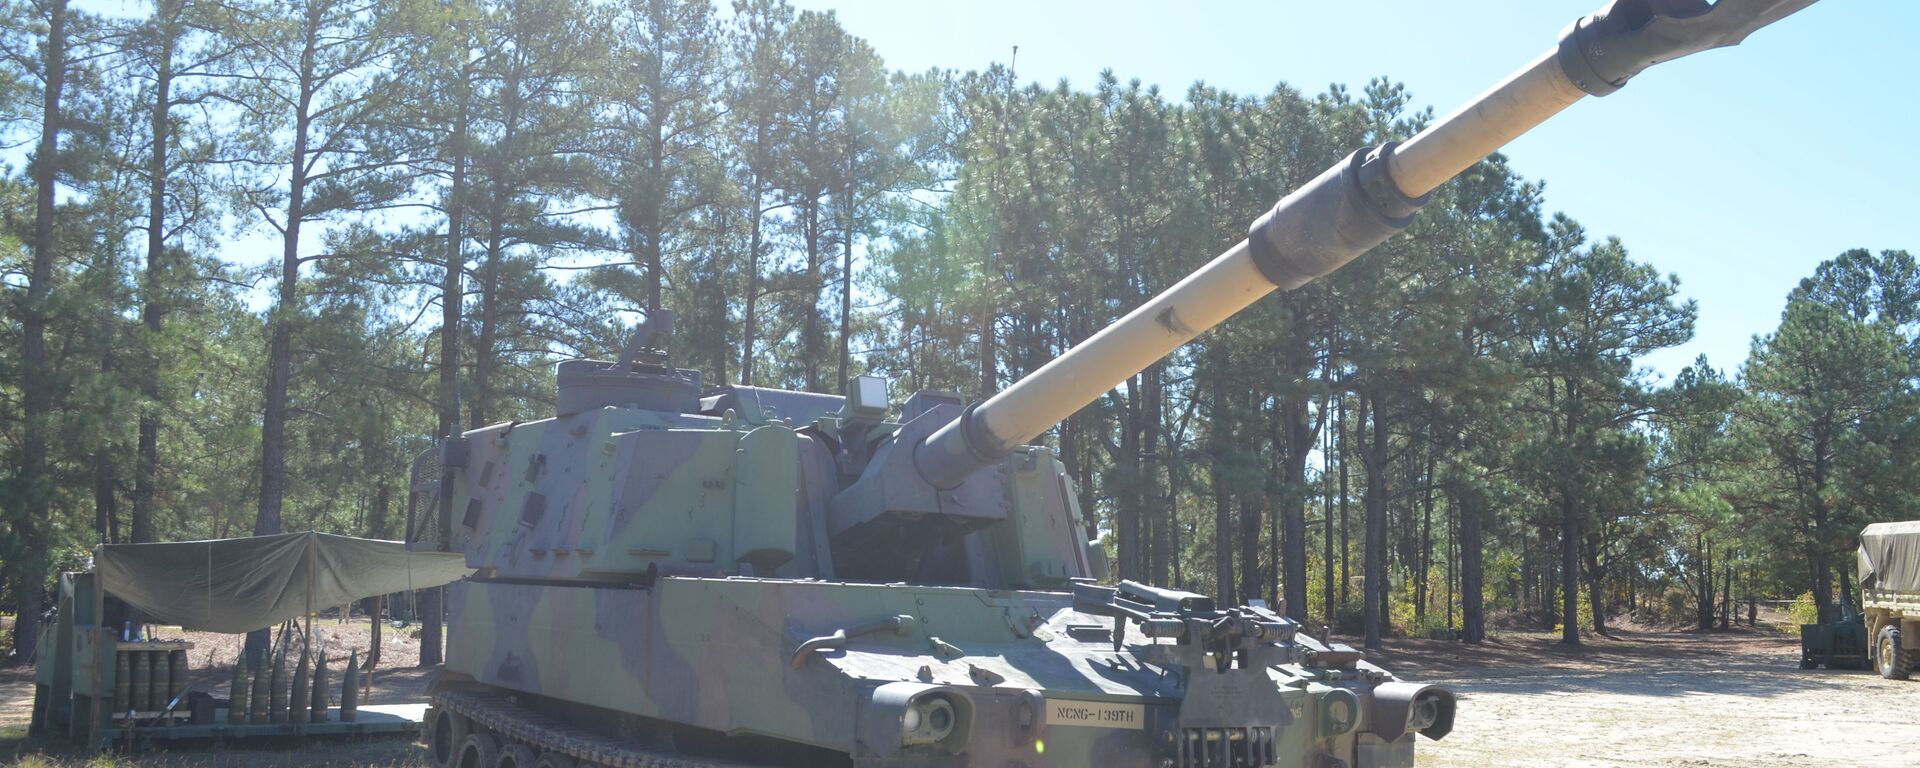 The M109 Paladin Self-Propelled Howitzer standing ready deep in the southern training areas at Fort Bragg. Nine National Guard troops from North and South Carolina, Florida, Georgia, Mississippi, Illinois and New Jersey are attending the 13 Bravo artillery military occupational specialty (MOS) reclassification course and will learn how to be a crew member on the three main “cannon” artillery weapons systems in the U.S. Army: The M119A3 105mm light towed howitzer, M777A2 155mm medium towed howitzer and the M109A6 Paladin 155mm self-propelled howitzer. Over the course of two days in the field, students will fire hundreds of rounds from all three weapons. - Sputnik International, 1920, 25.05.2022